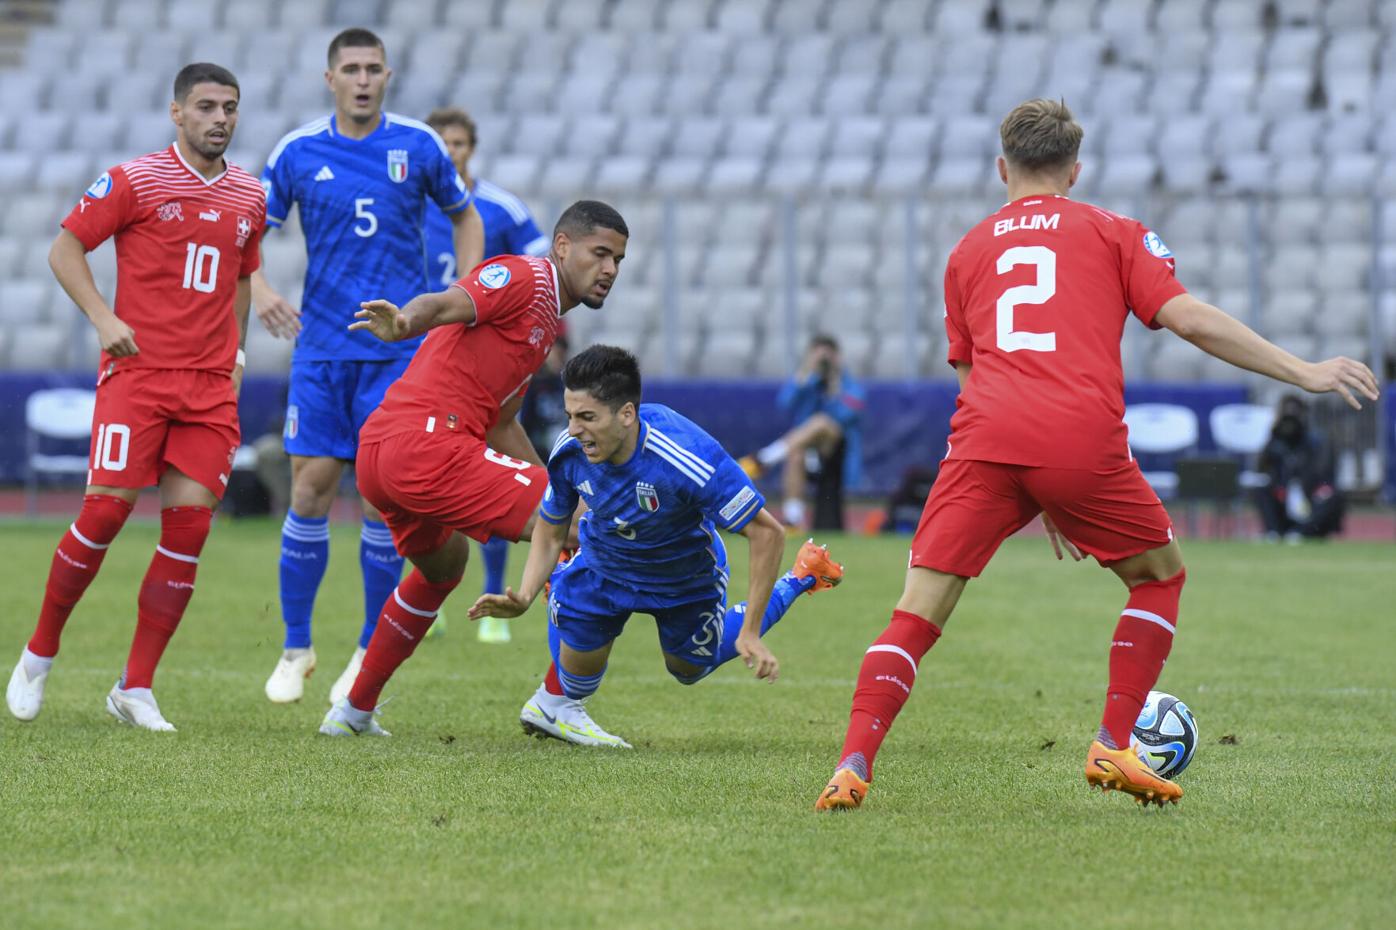 Paolo Nicolato's Italy U-21 caught their first win in the European Championship as they survived Switzerland's comeback to hold to a 3-2 success